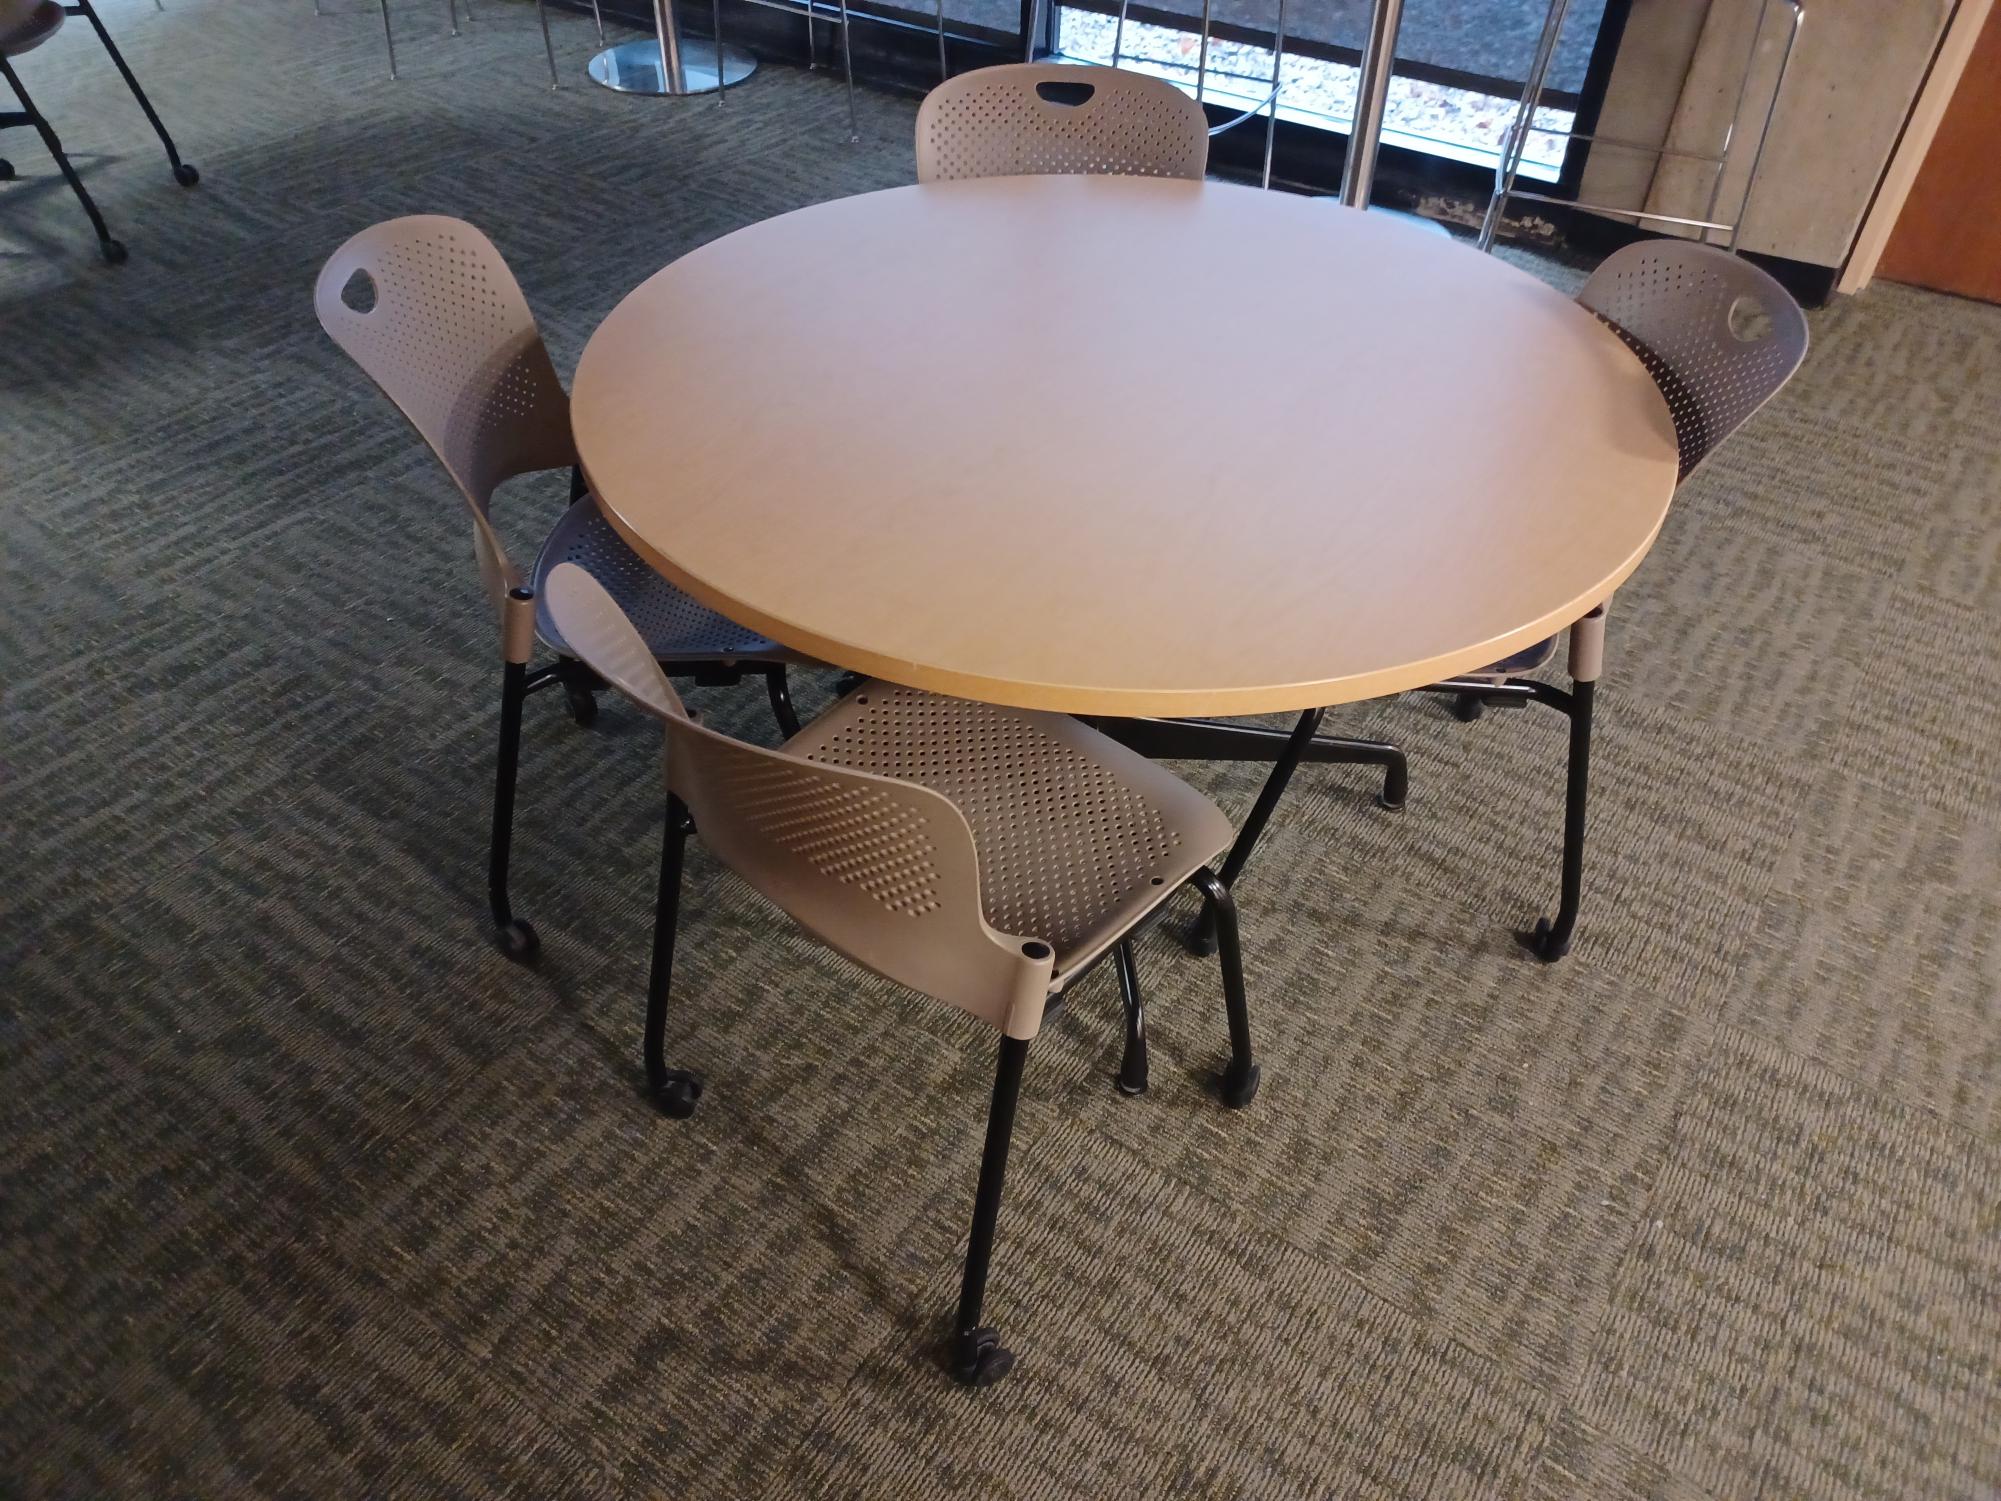 A table that is conducive to Restorative Justice conversations and circles. 